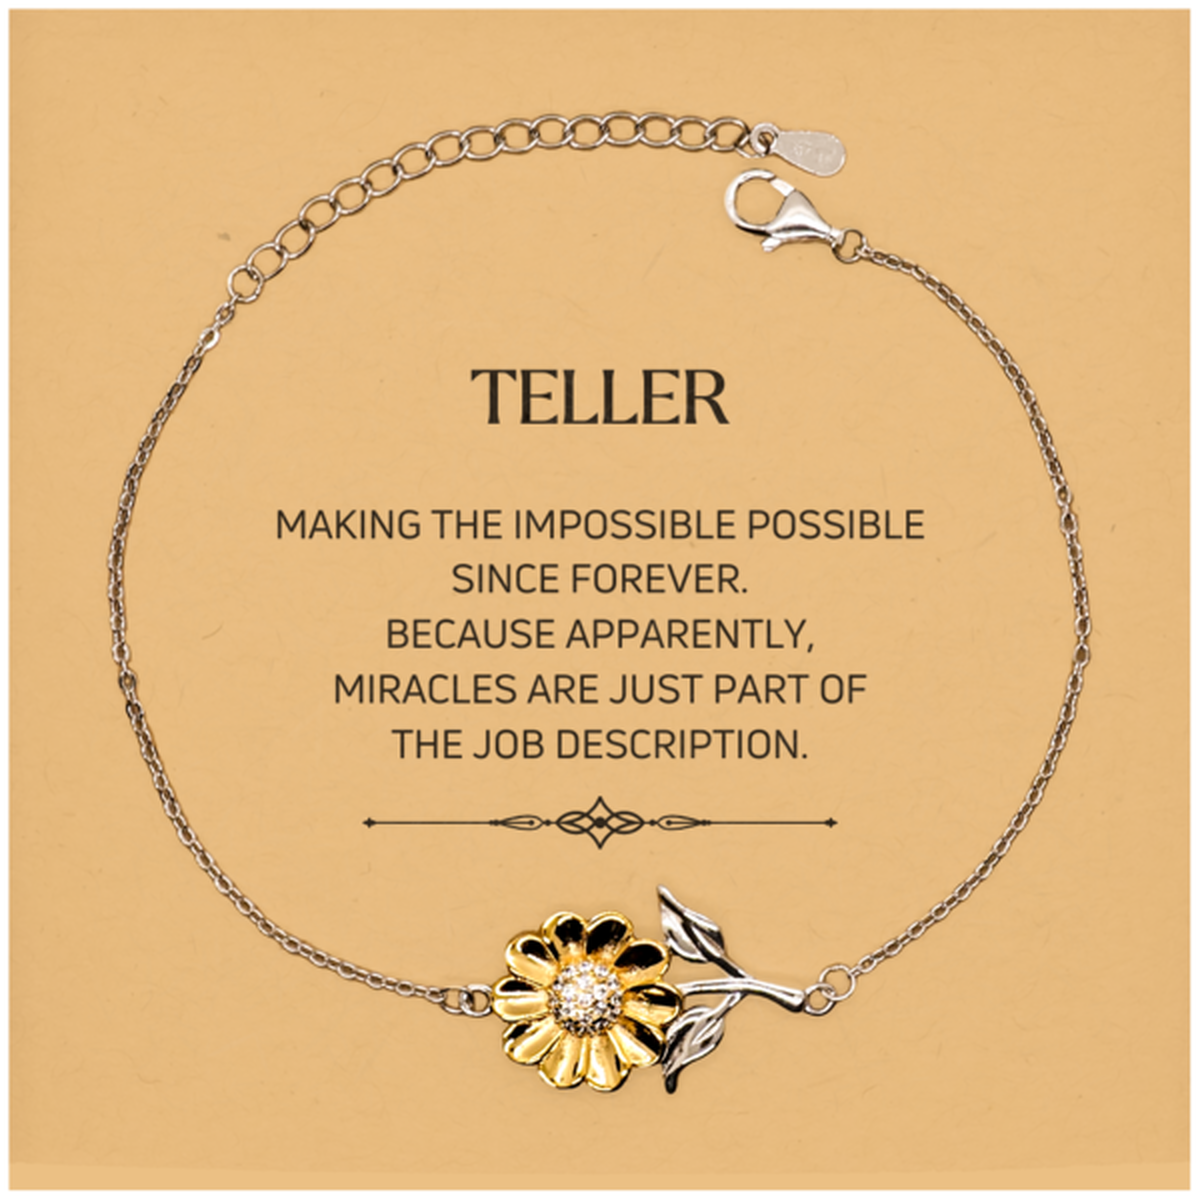 Funny Teller Gifts, Miracles are just part of the job description, Inspirational Birthday Christmas Sunflower Bracelet For Teller, Men, Women, Coworkers, Friends, Boss